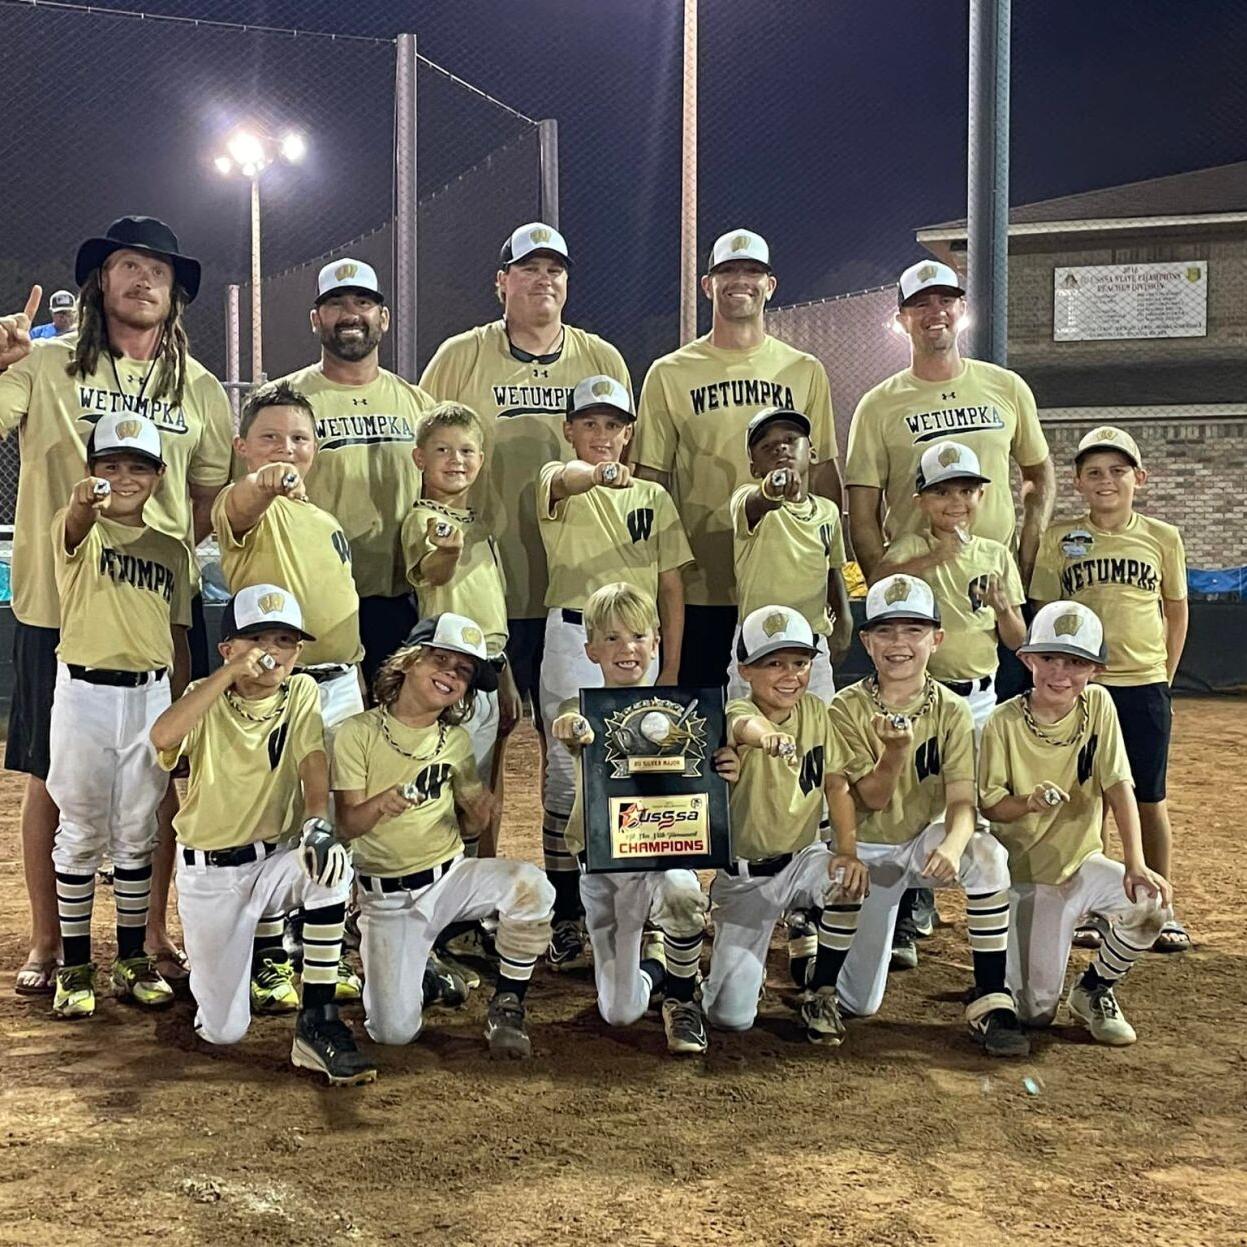 Wetumpka sends four youth baseball teams to USSSA World Series